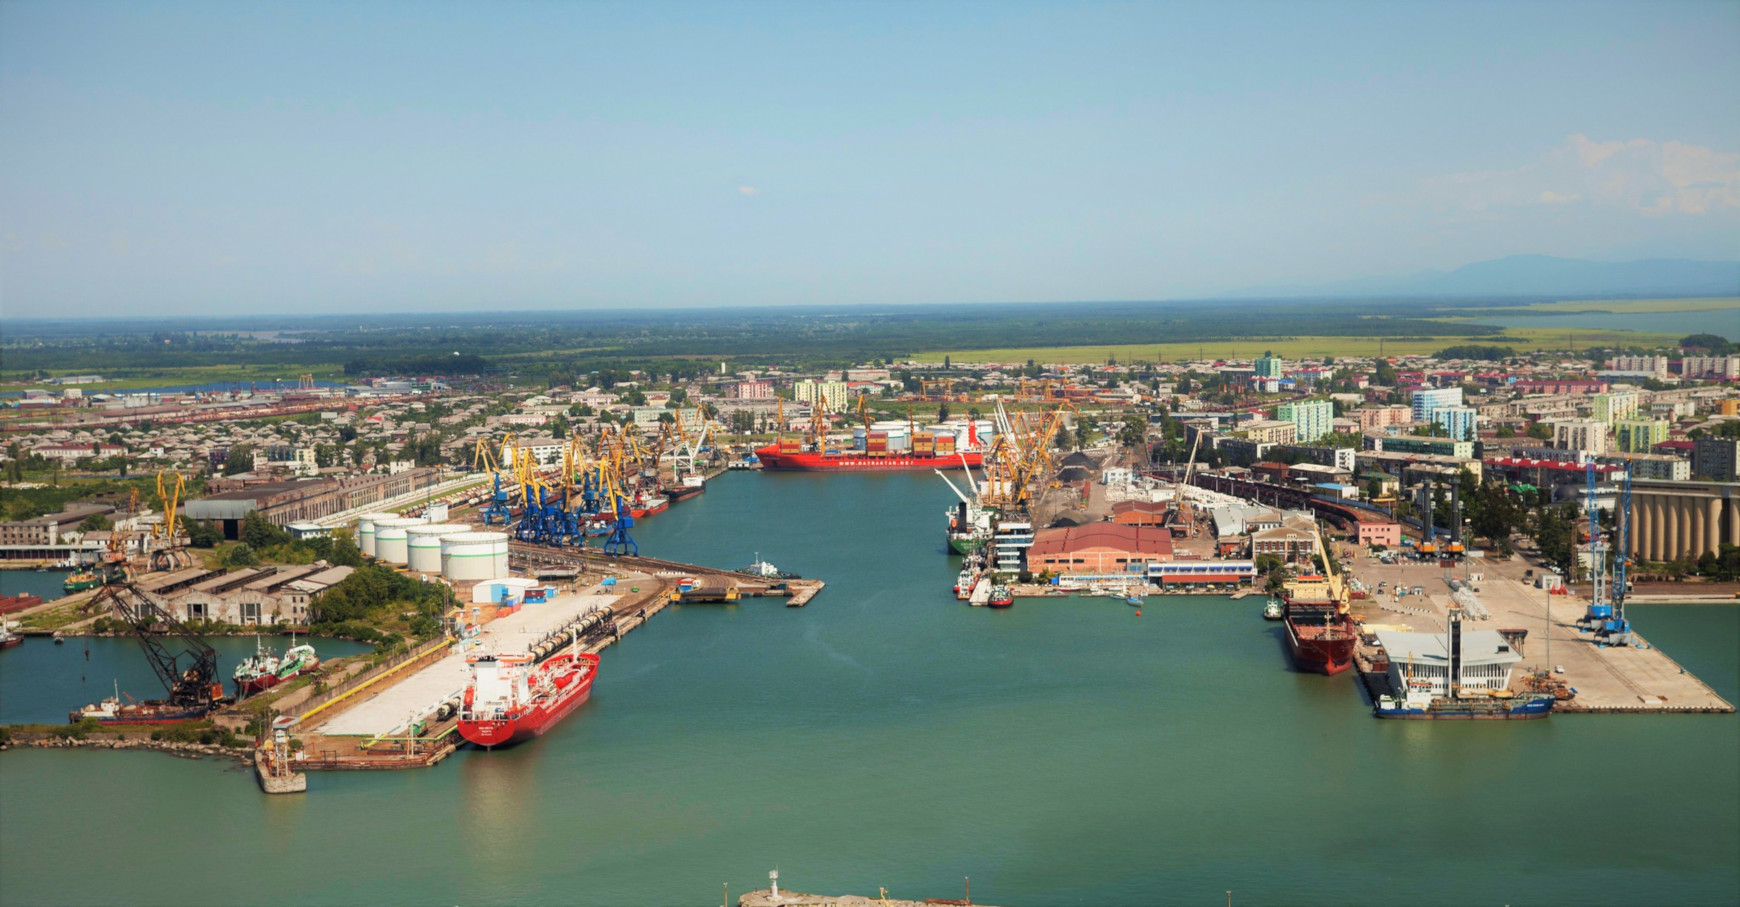 APM Terminals Poti to implement uninterrupted 24/7 operations